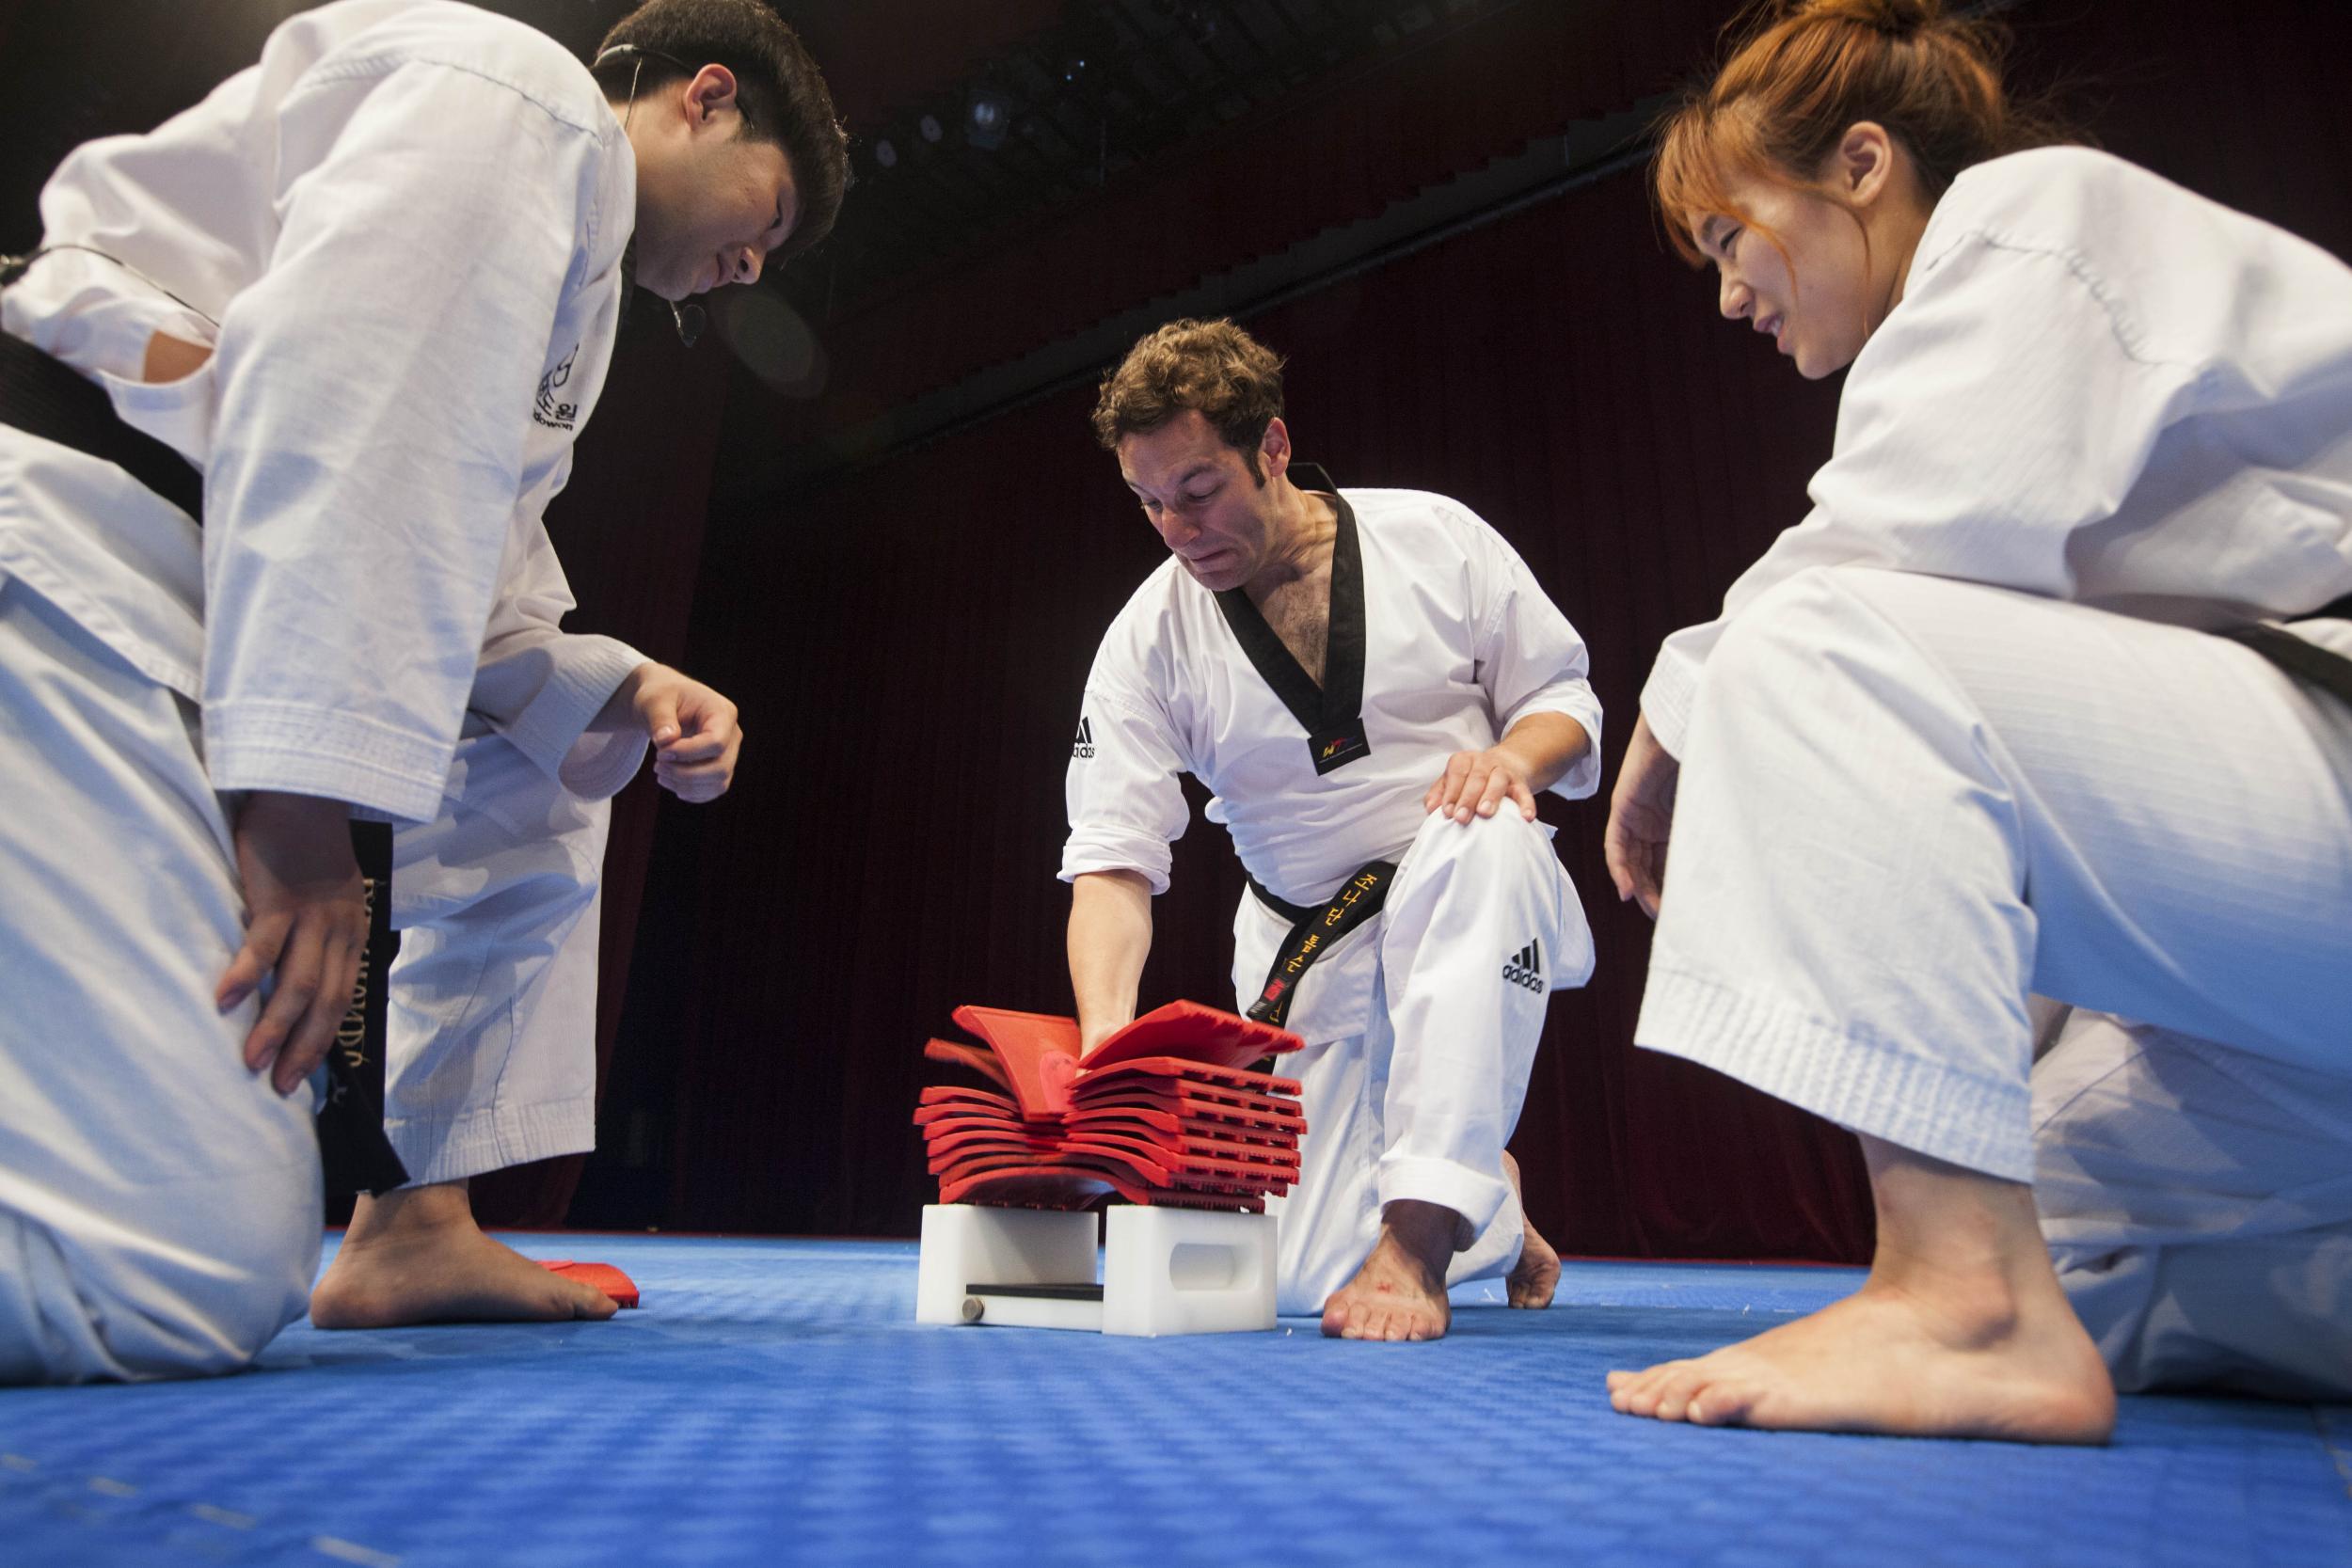 &#13;
Teachers at Taekwondowon guarantee visitors will be able to smash blocks with their bare hands after just one lesson &#13;